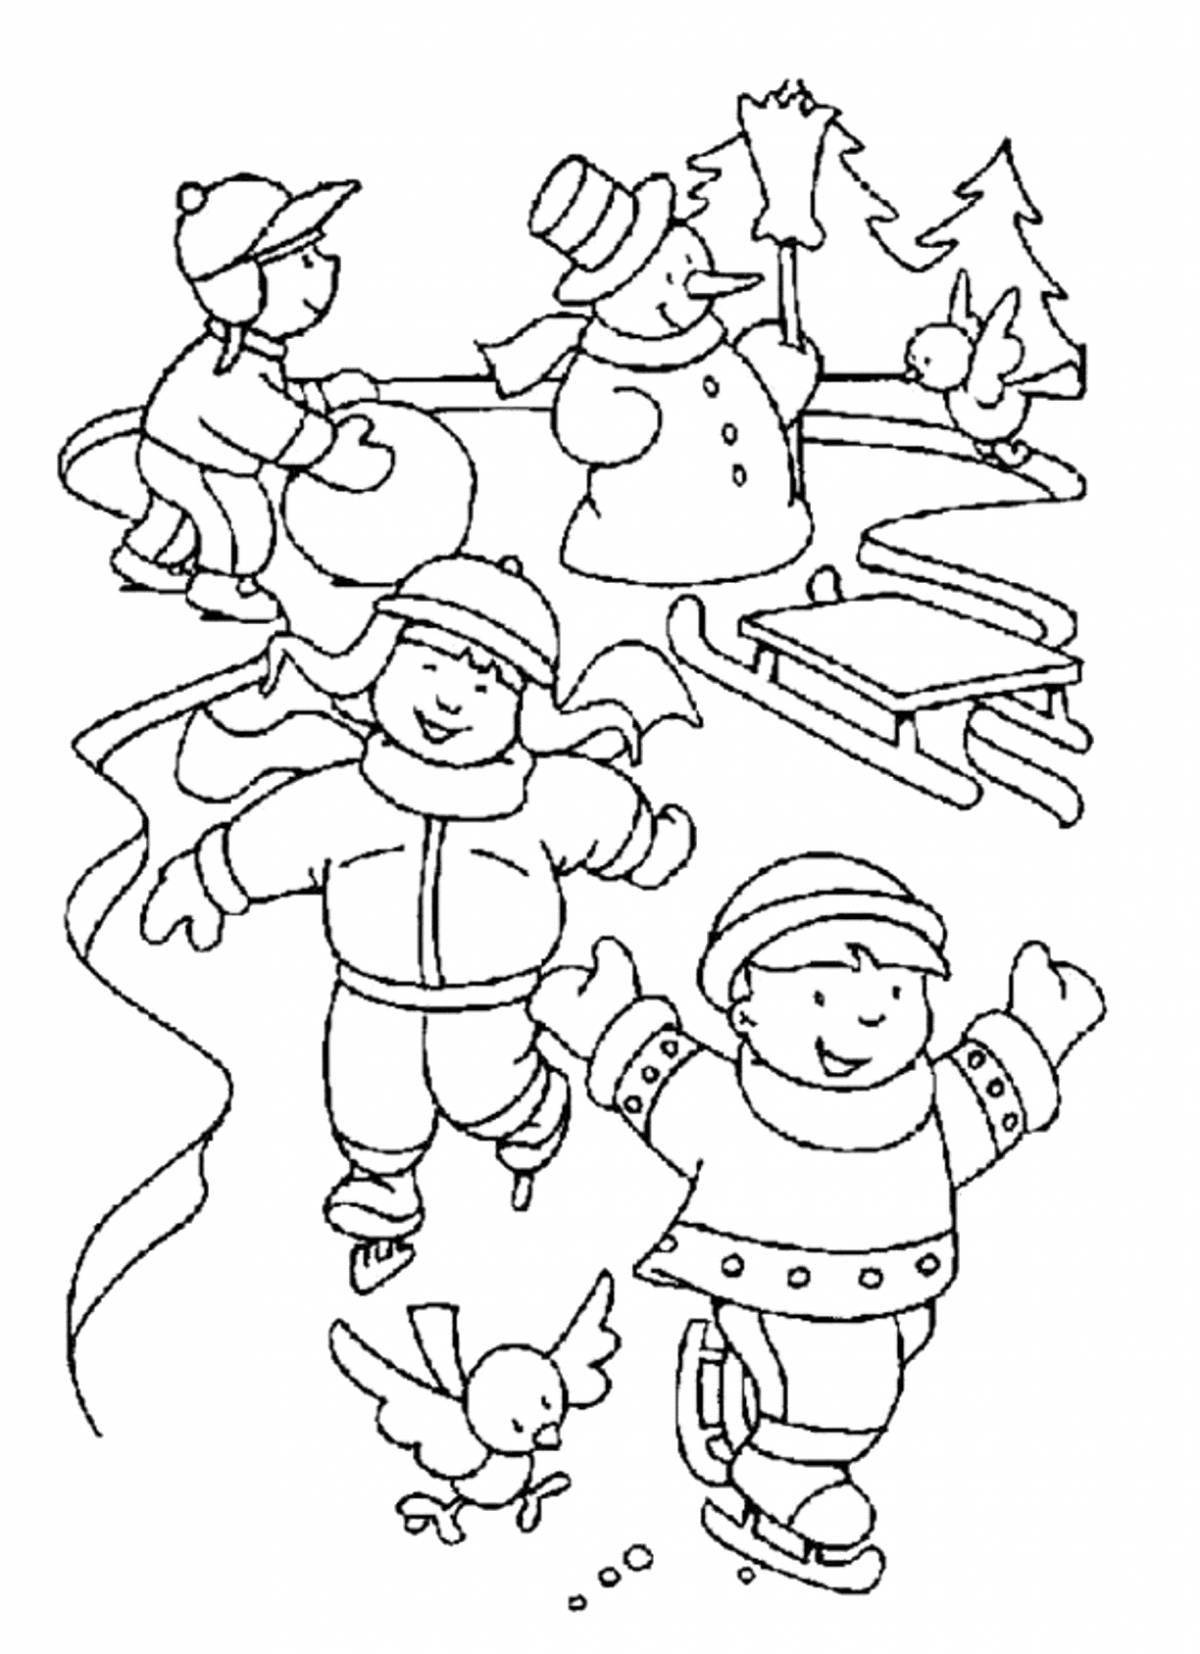 Exotic winter coloring book for kids